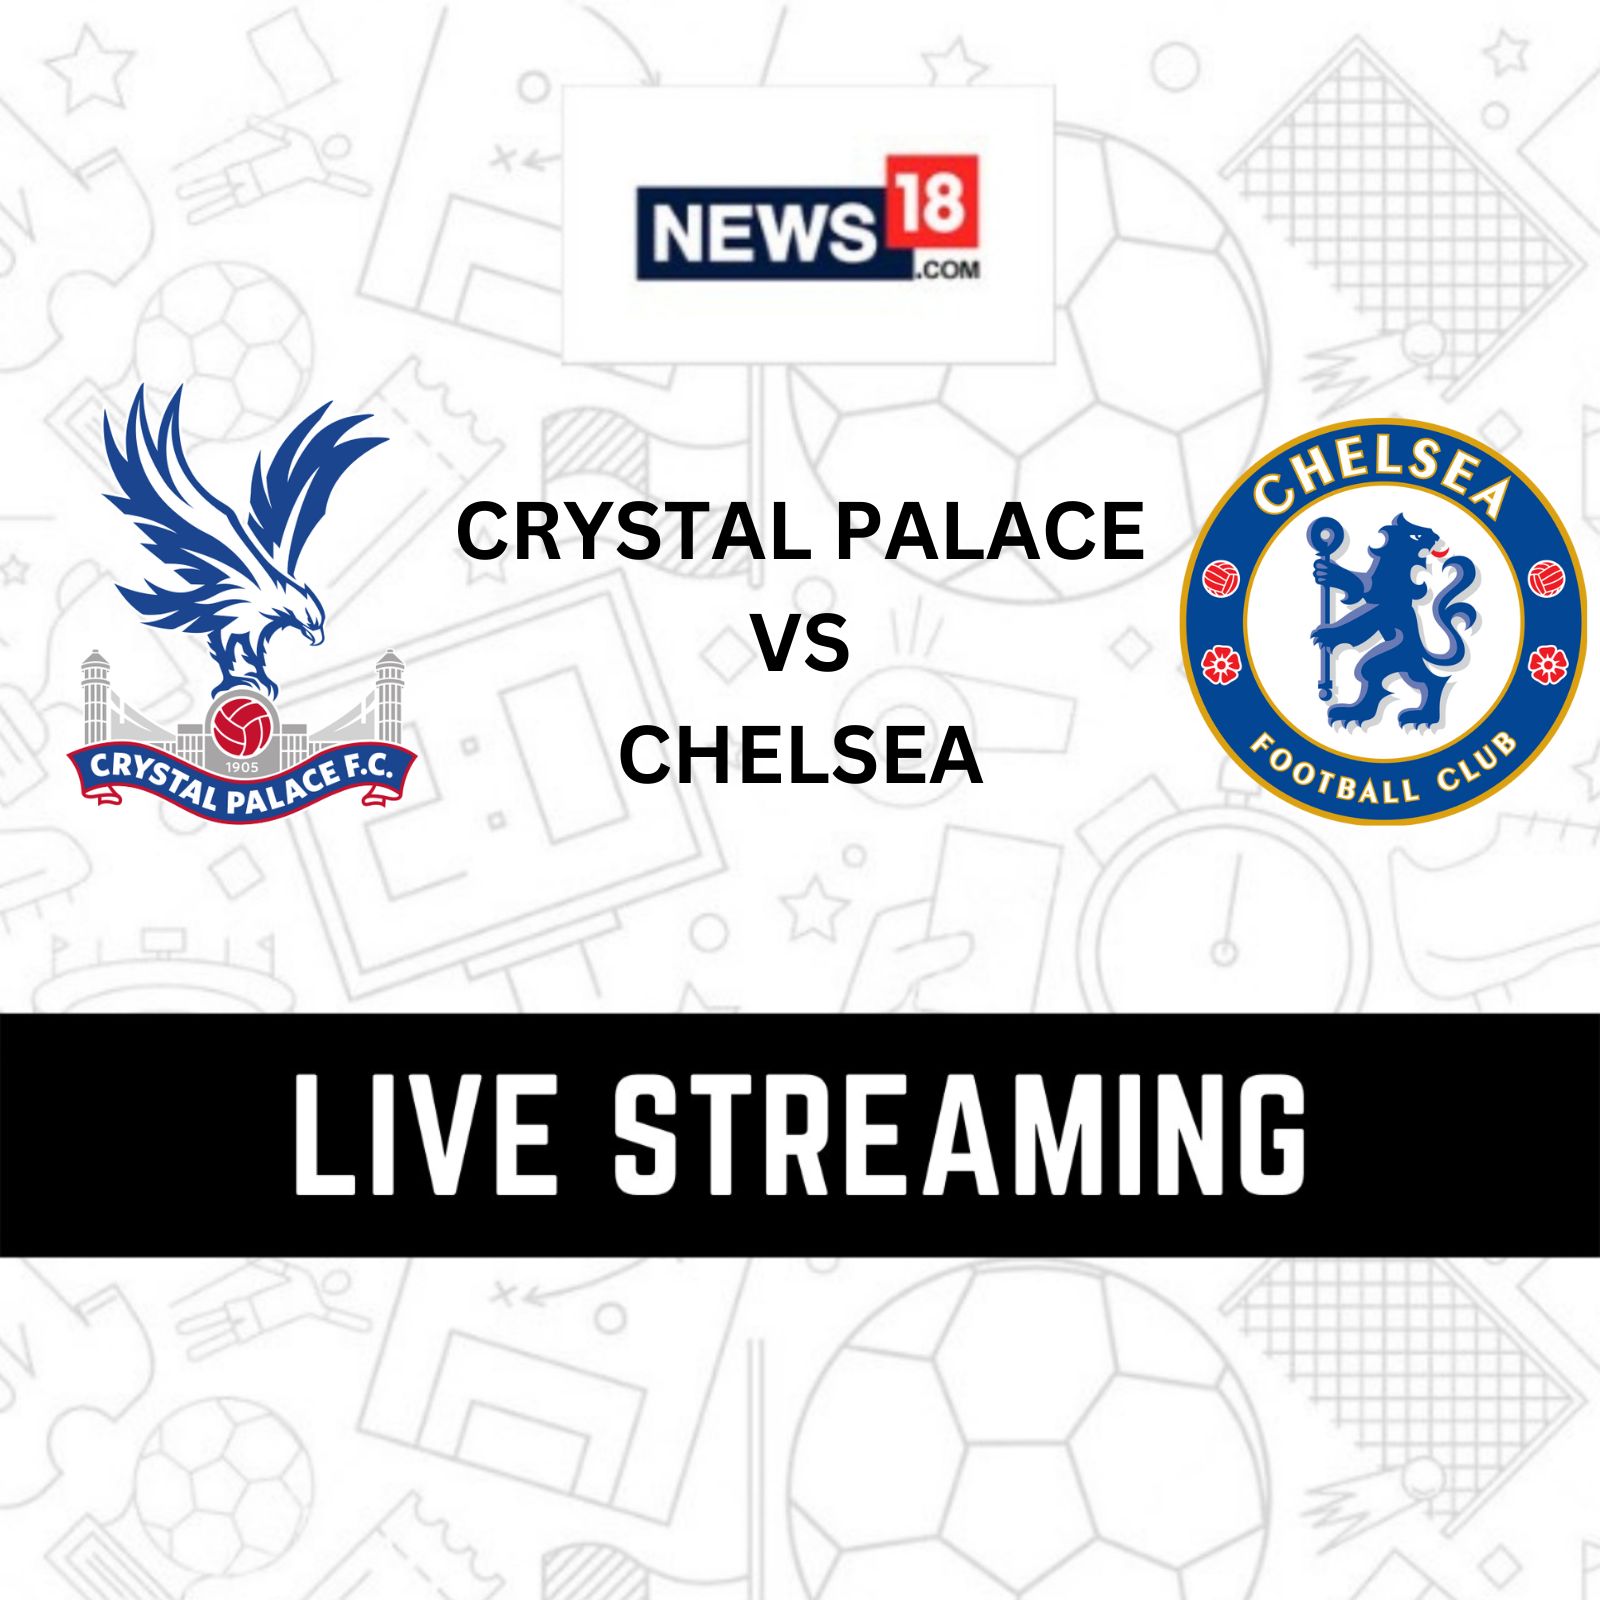 Crystal Palace vs Chelsea Live Streaming When and Where to Watch Crystal Palace vs Chelsea Premier League 2022-23 Live Coverage on Live TV Online